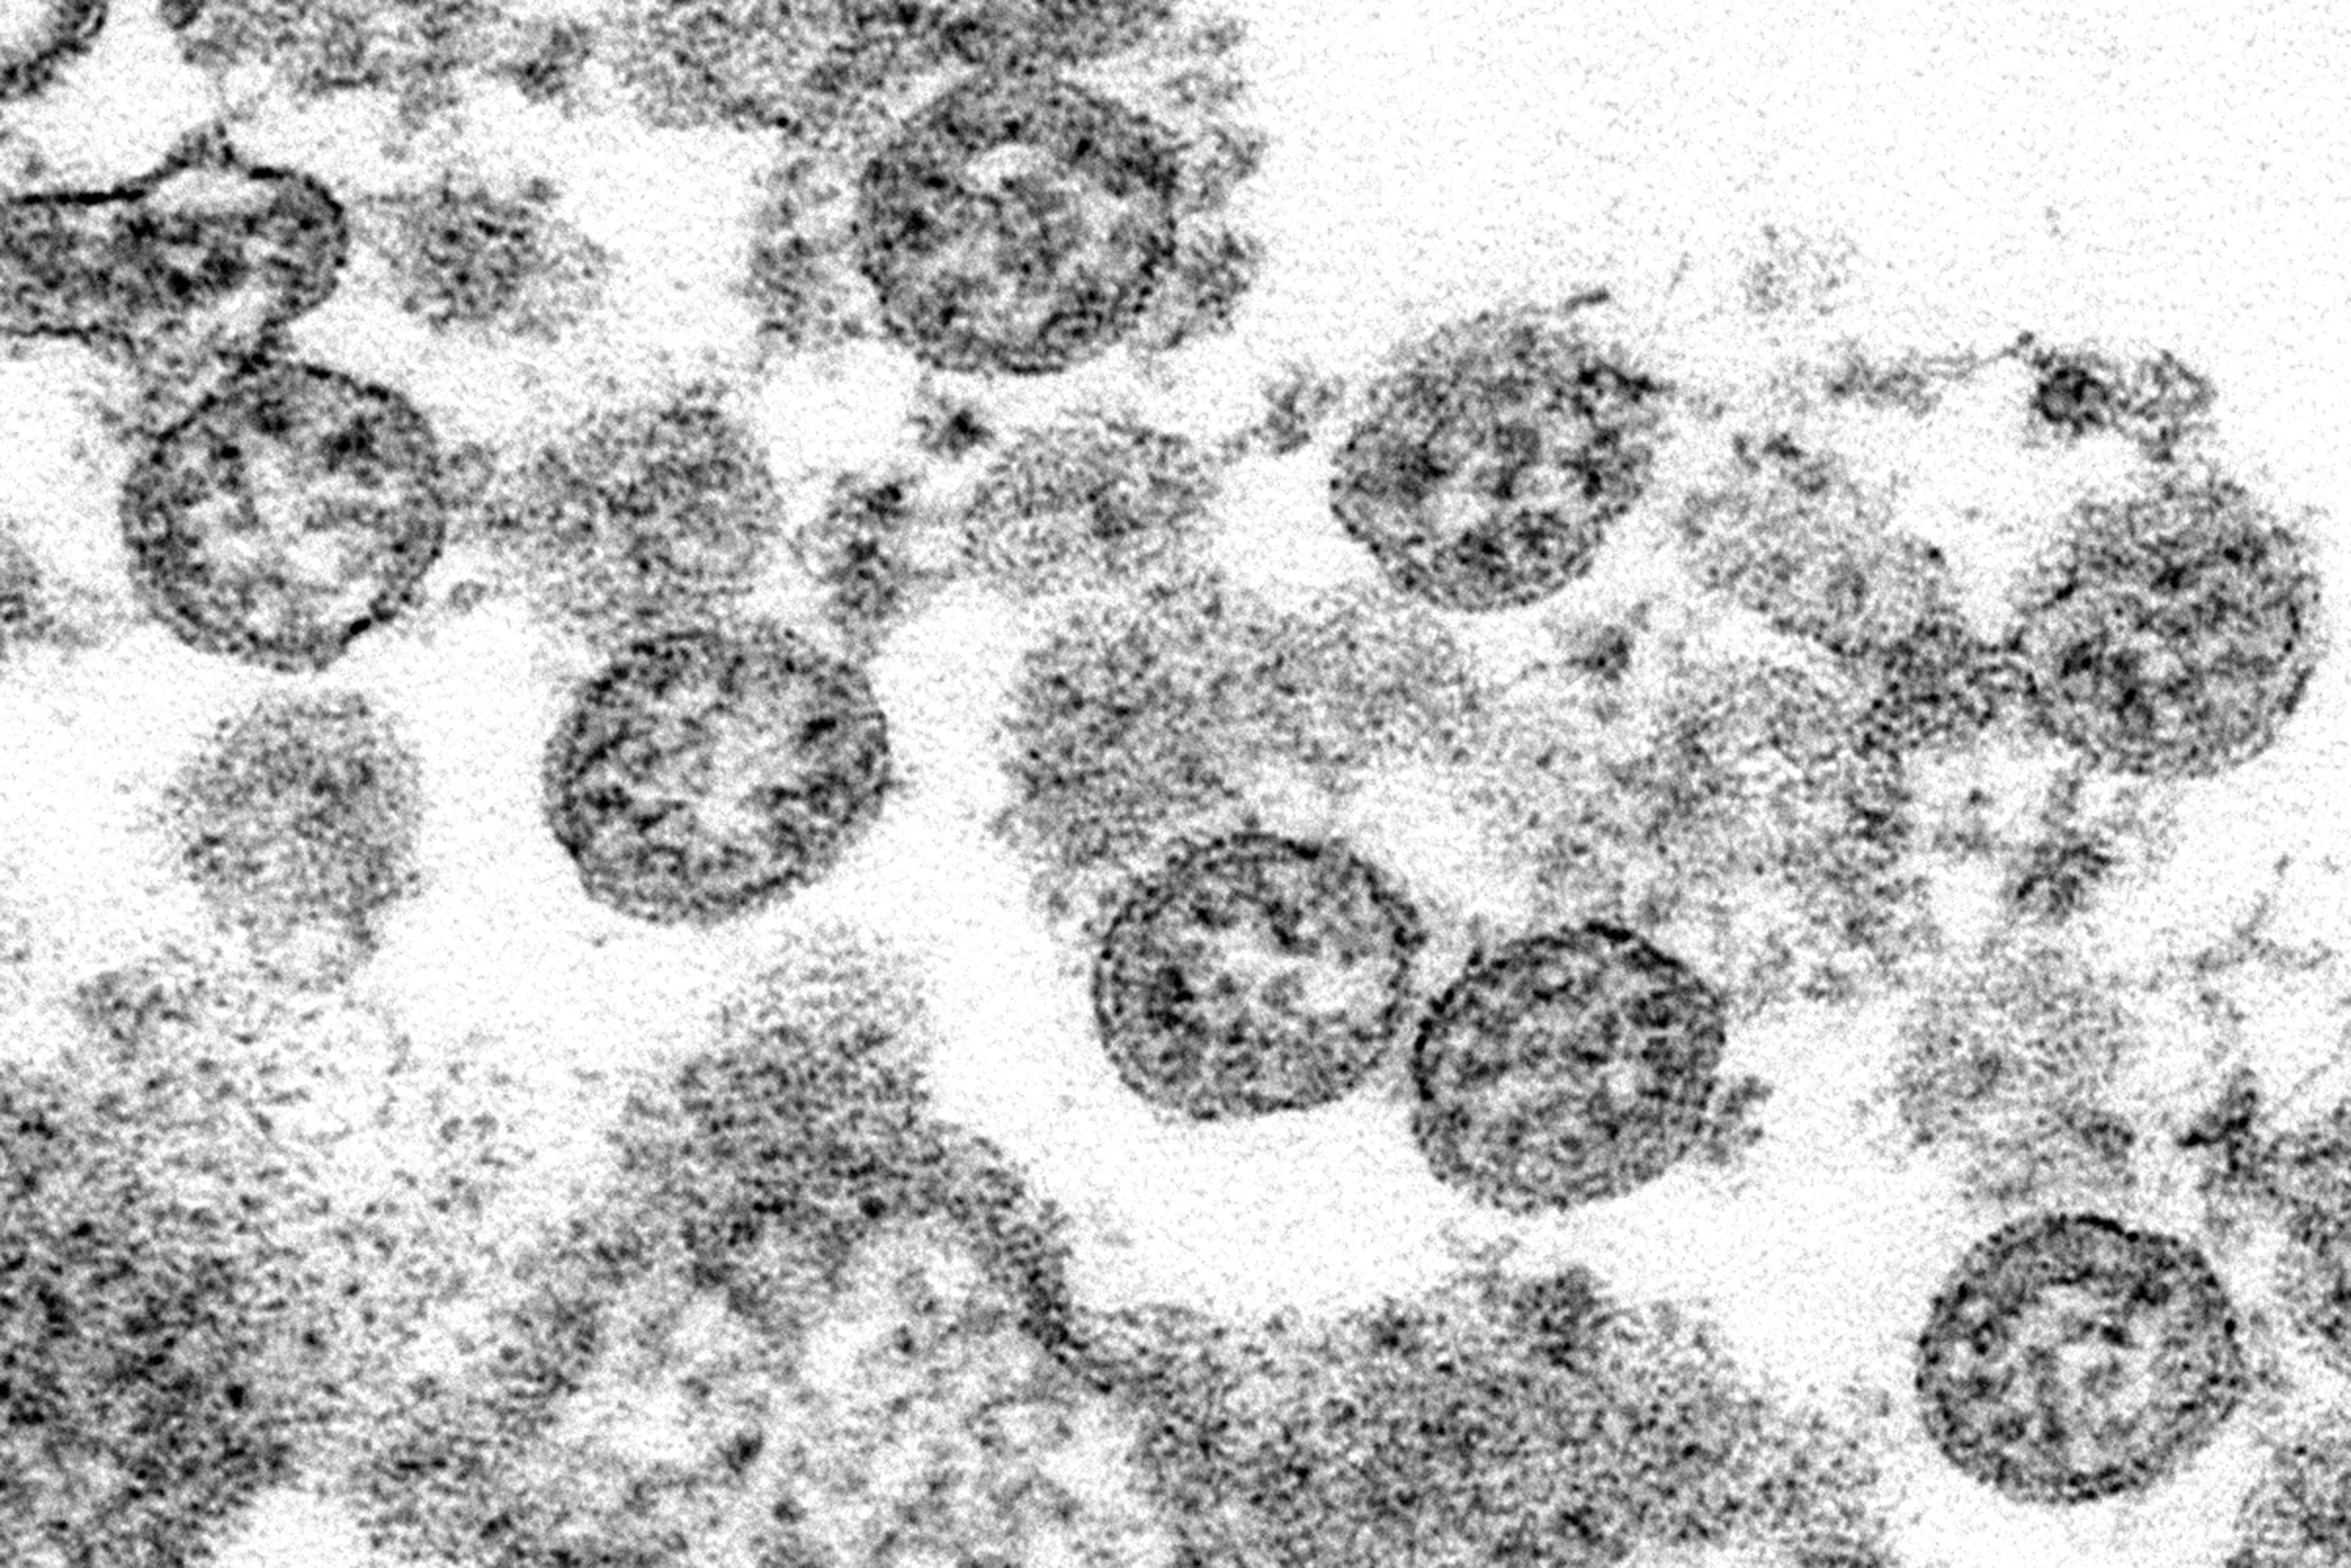 This 2020 electron microscope image shows the spherical coronavirus particles in what was believed to be the first US case of Covid